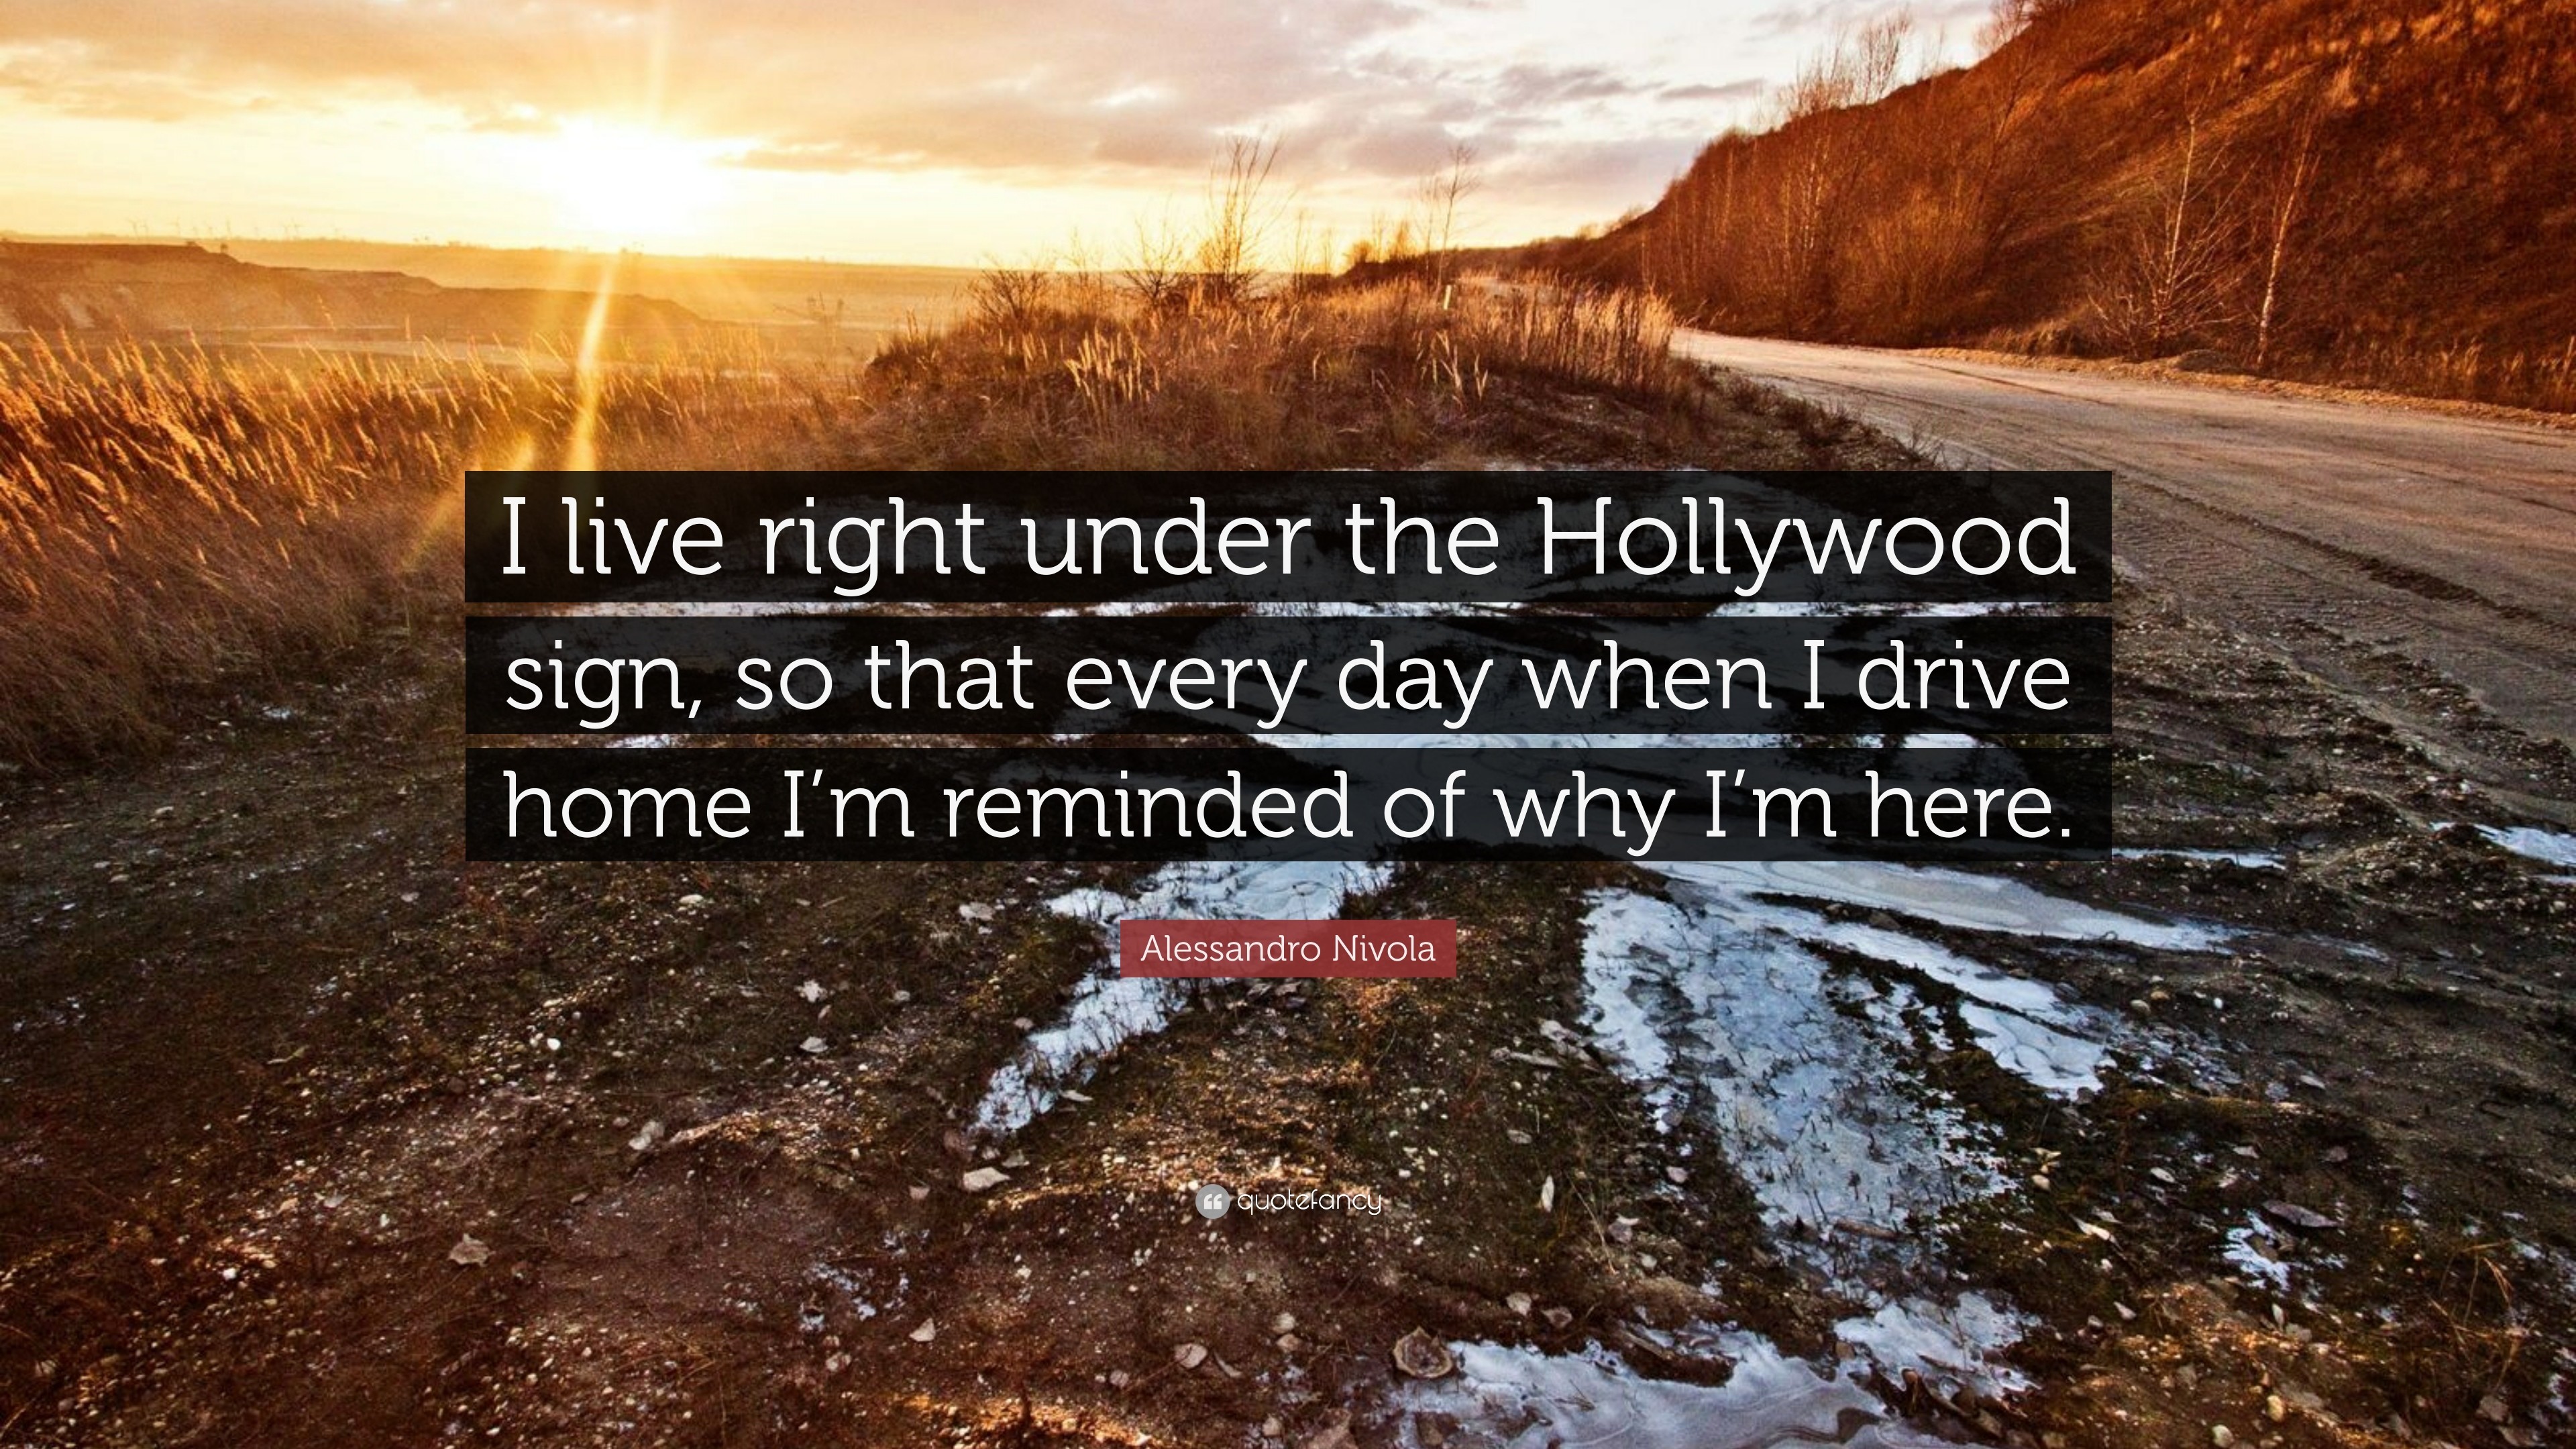 3840x2160 Alessandro Nivola Quote: “I live right under the Hollywood sign, so that  every